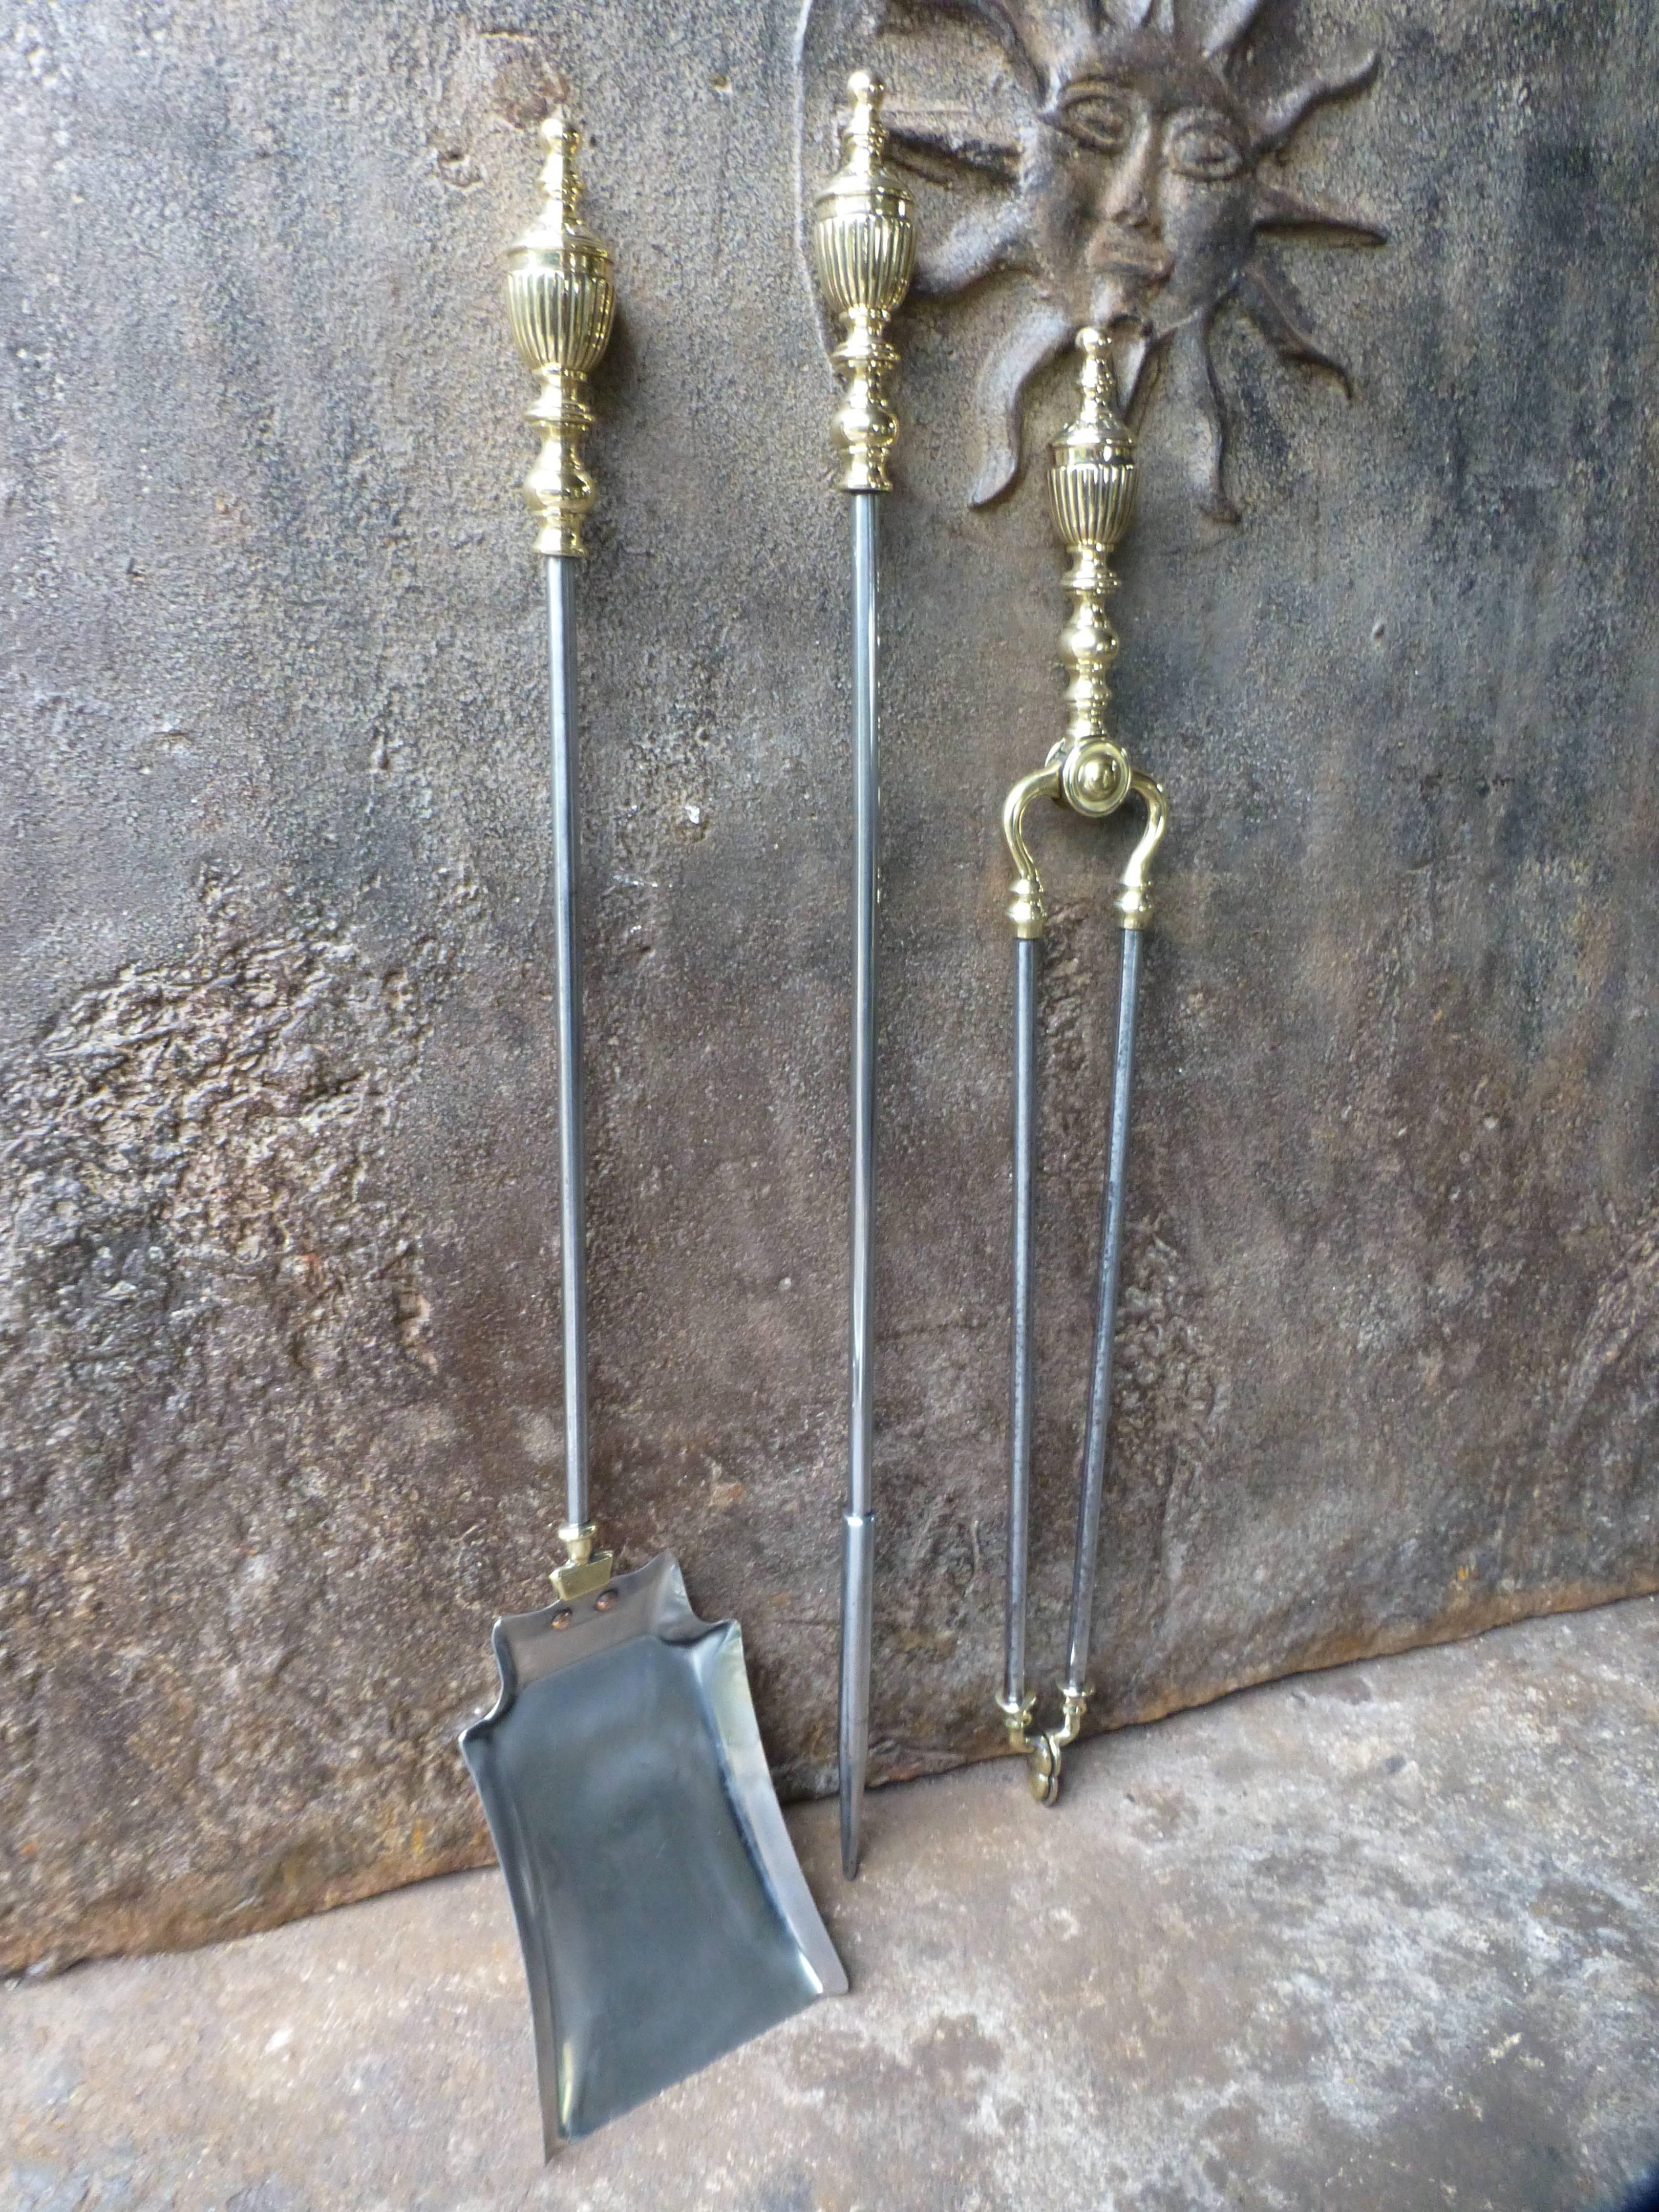 19th century English fire irons - companion set made of polished steel and brass handles and other details.
 